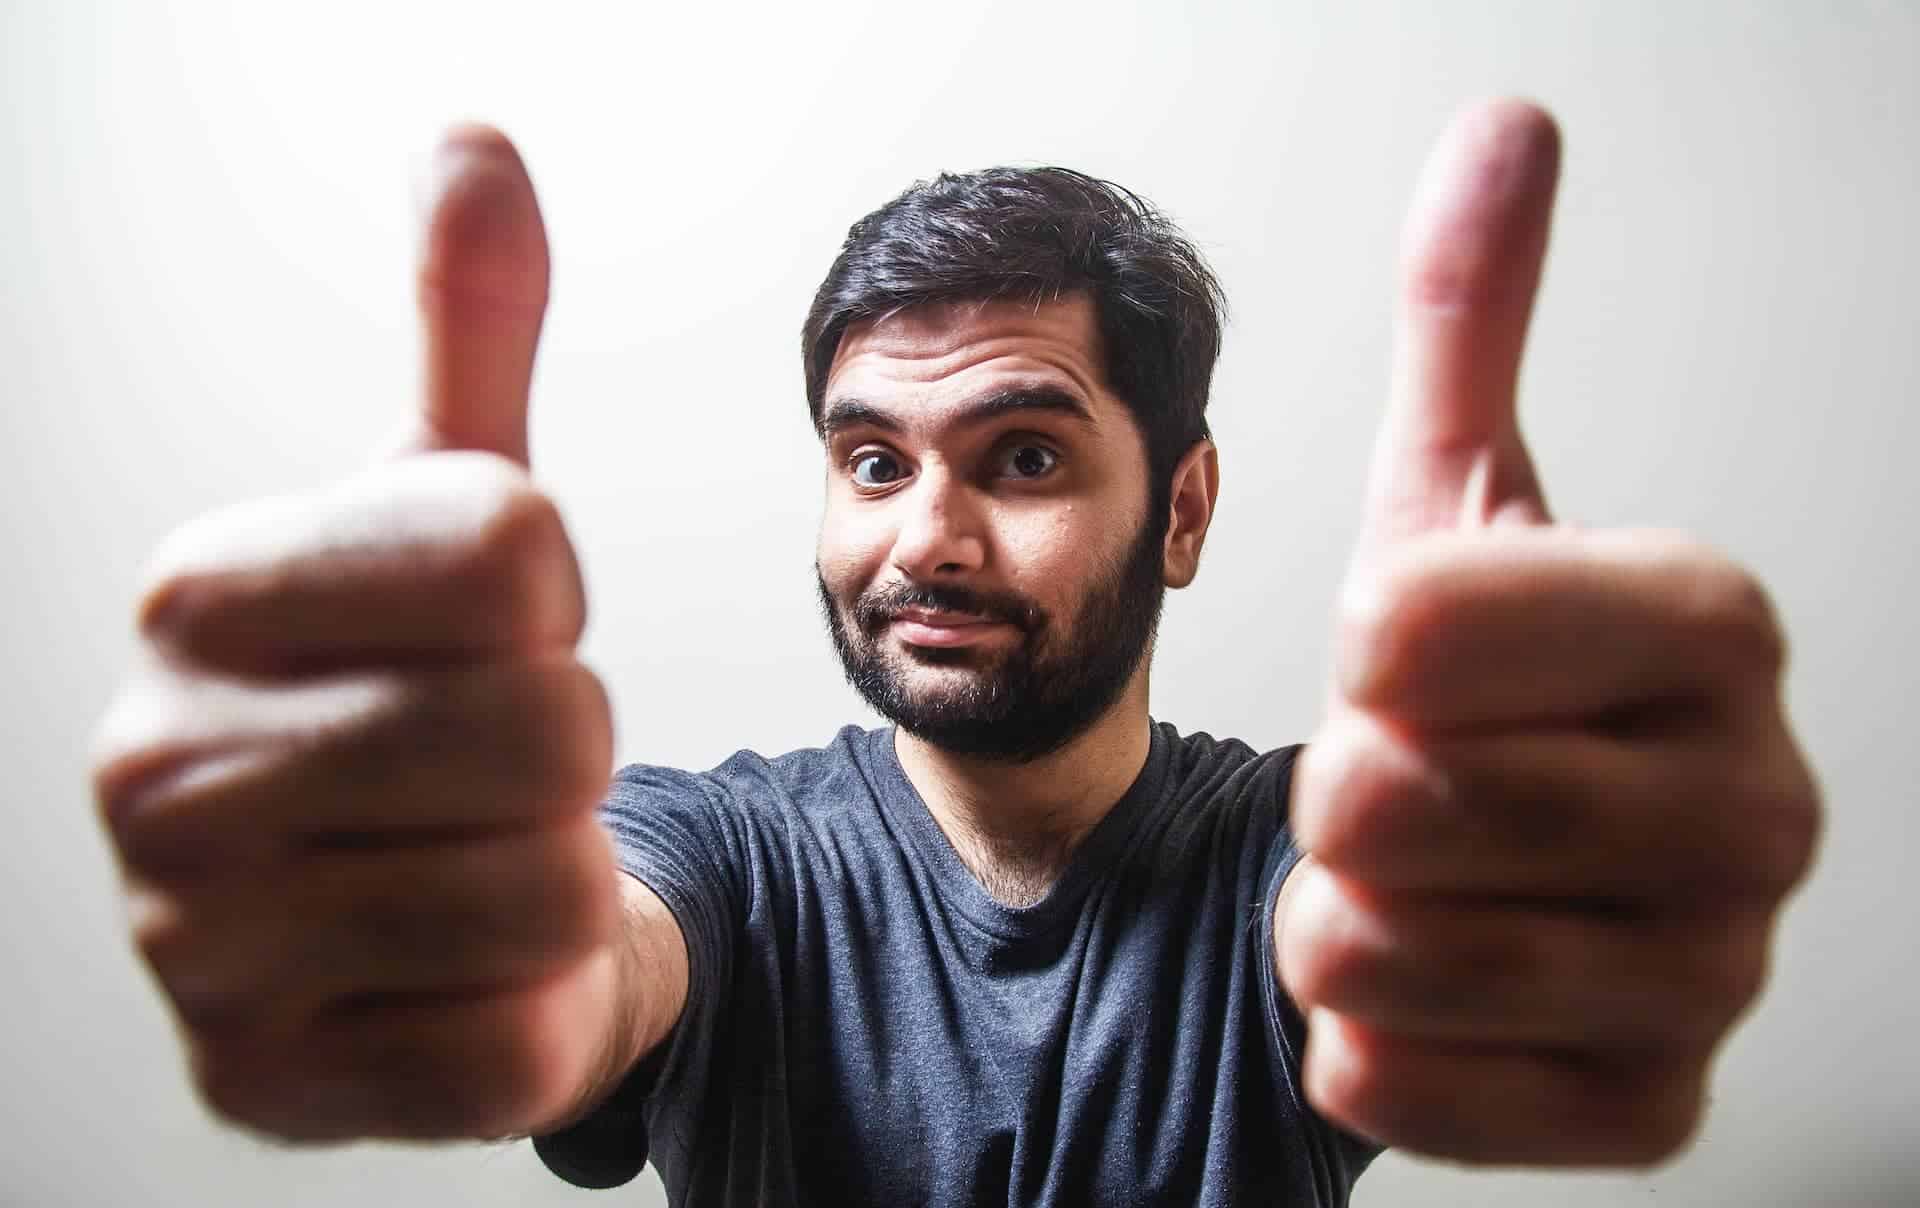 Man giving two thumbs up